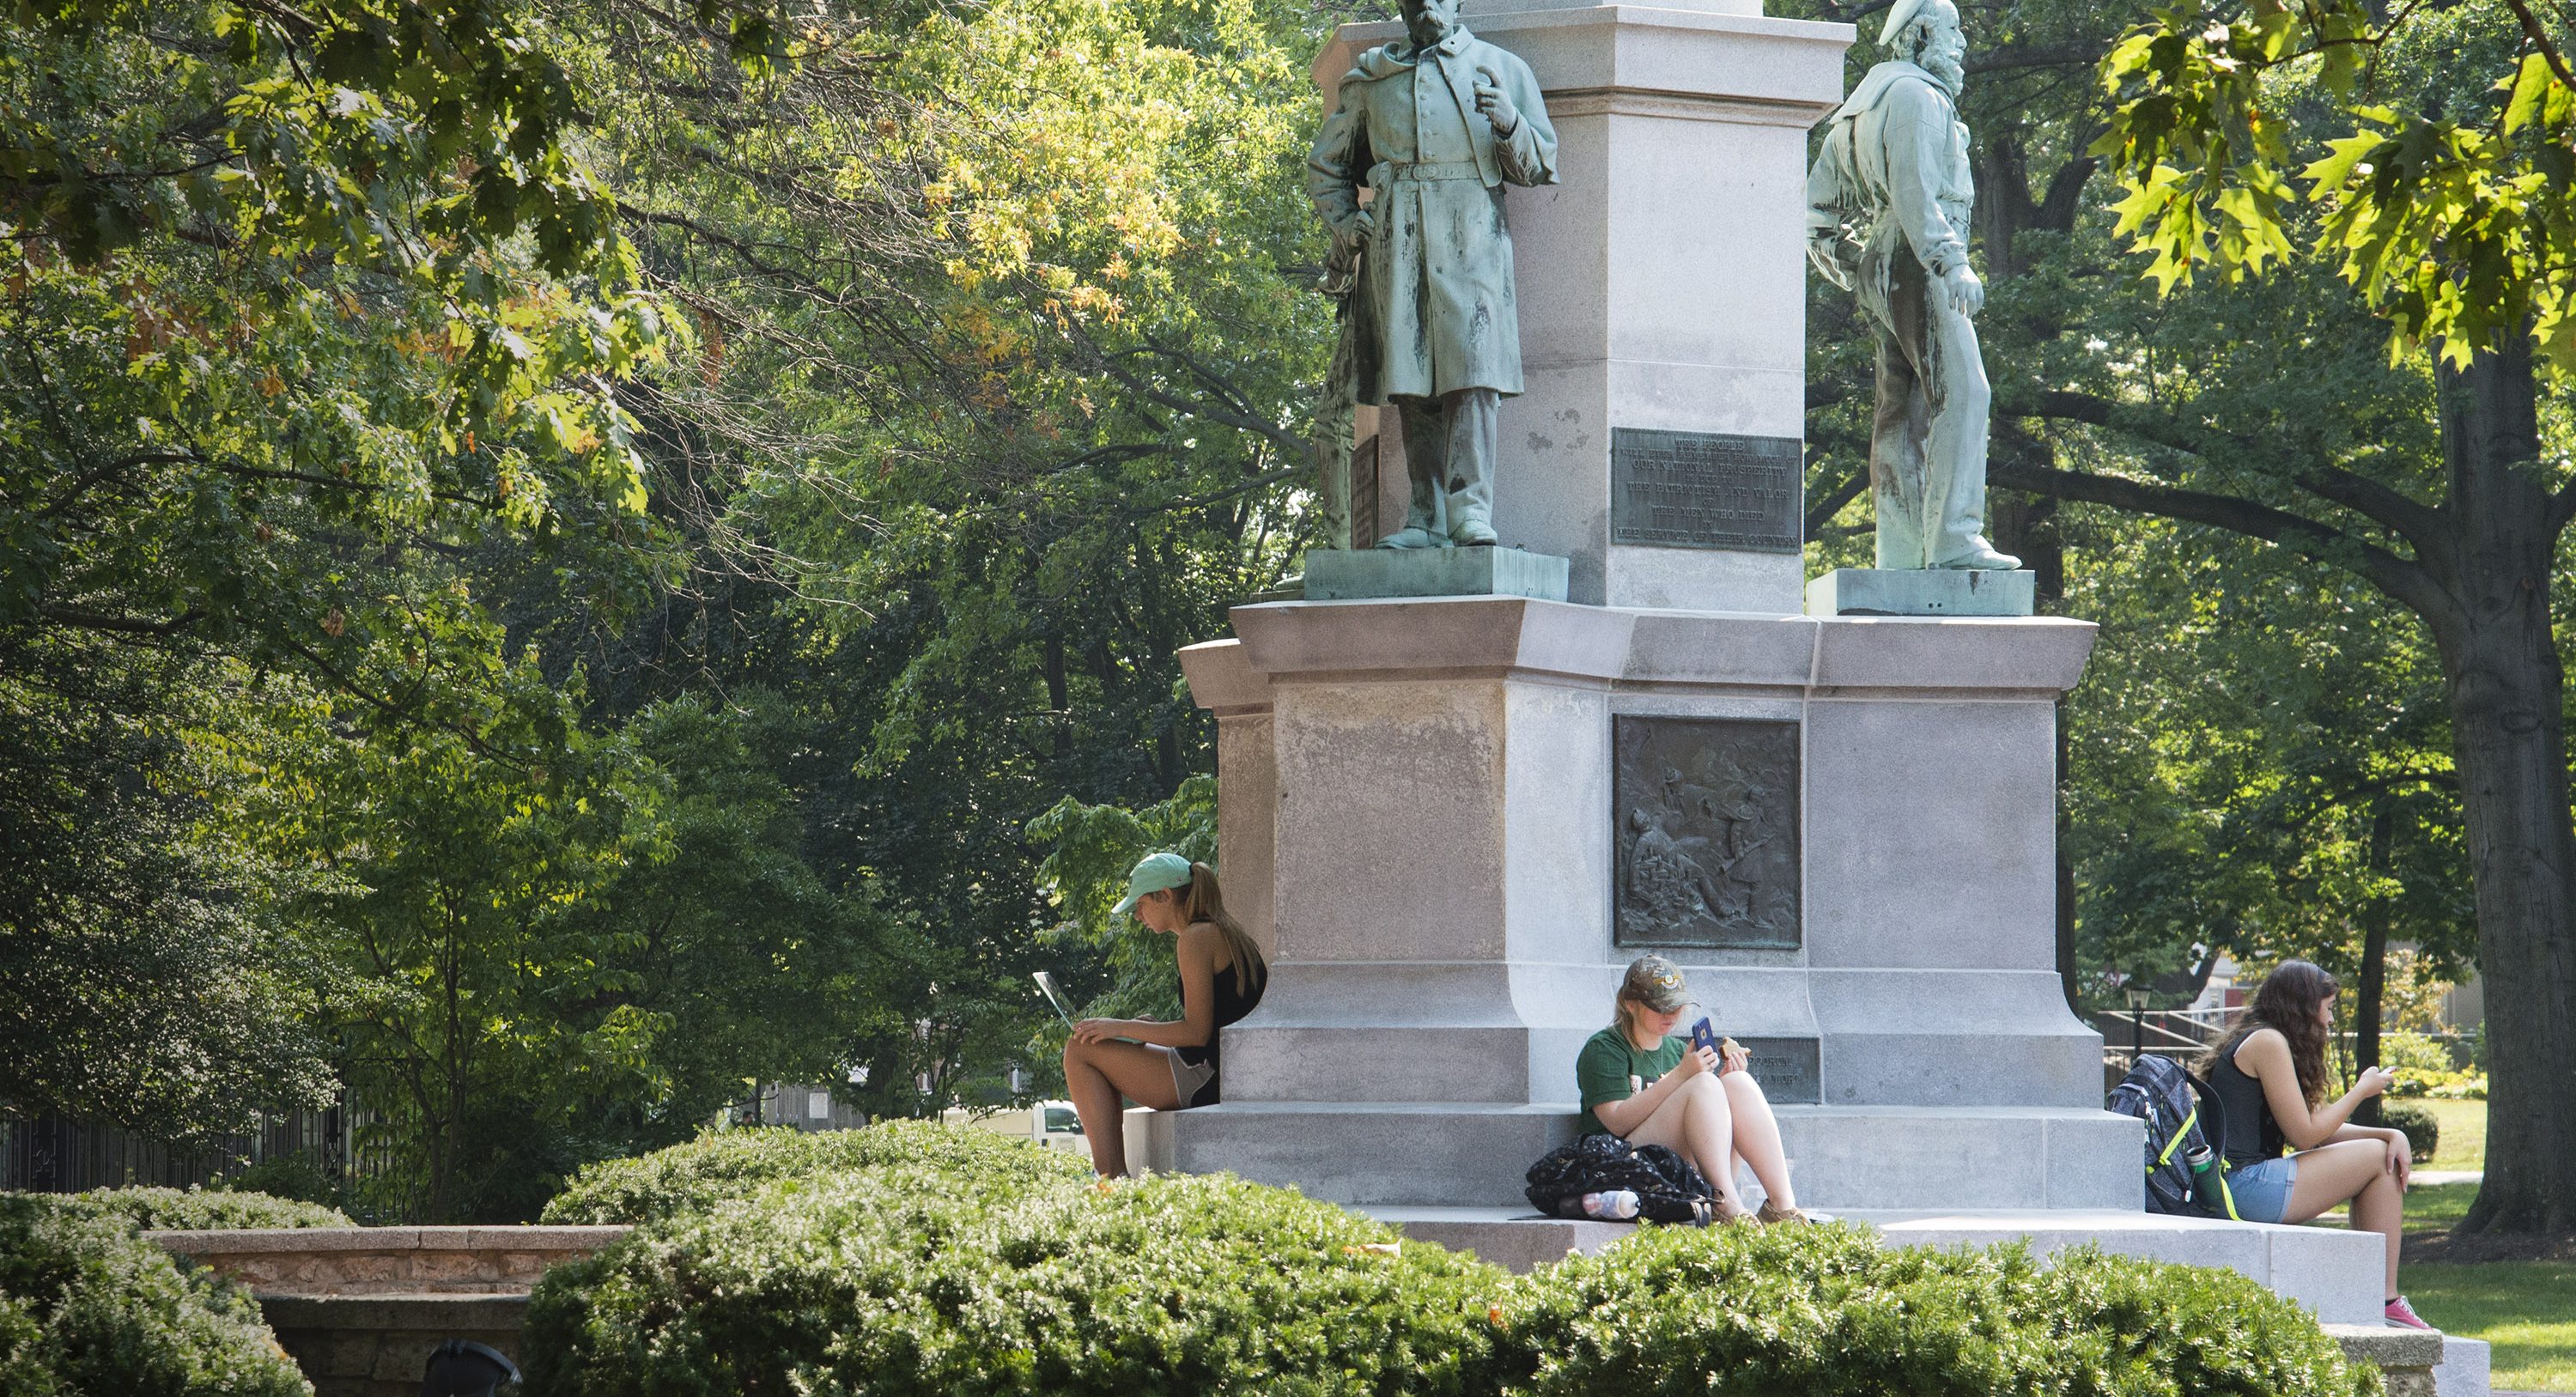 Three women students sit separately around the base of the Soldiers Monument on Ohio University Athens campus